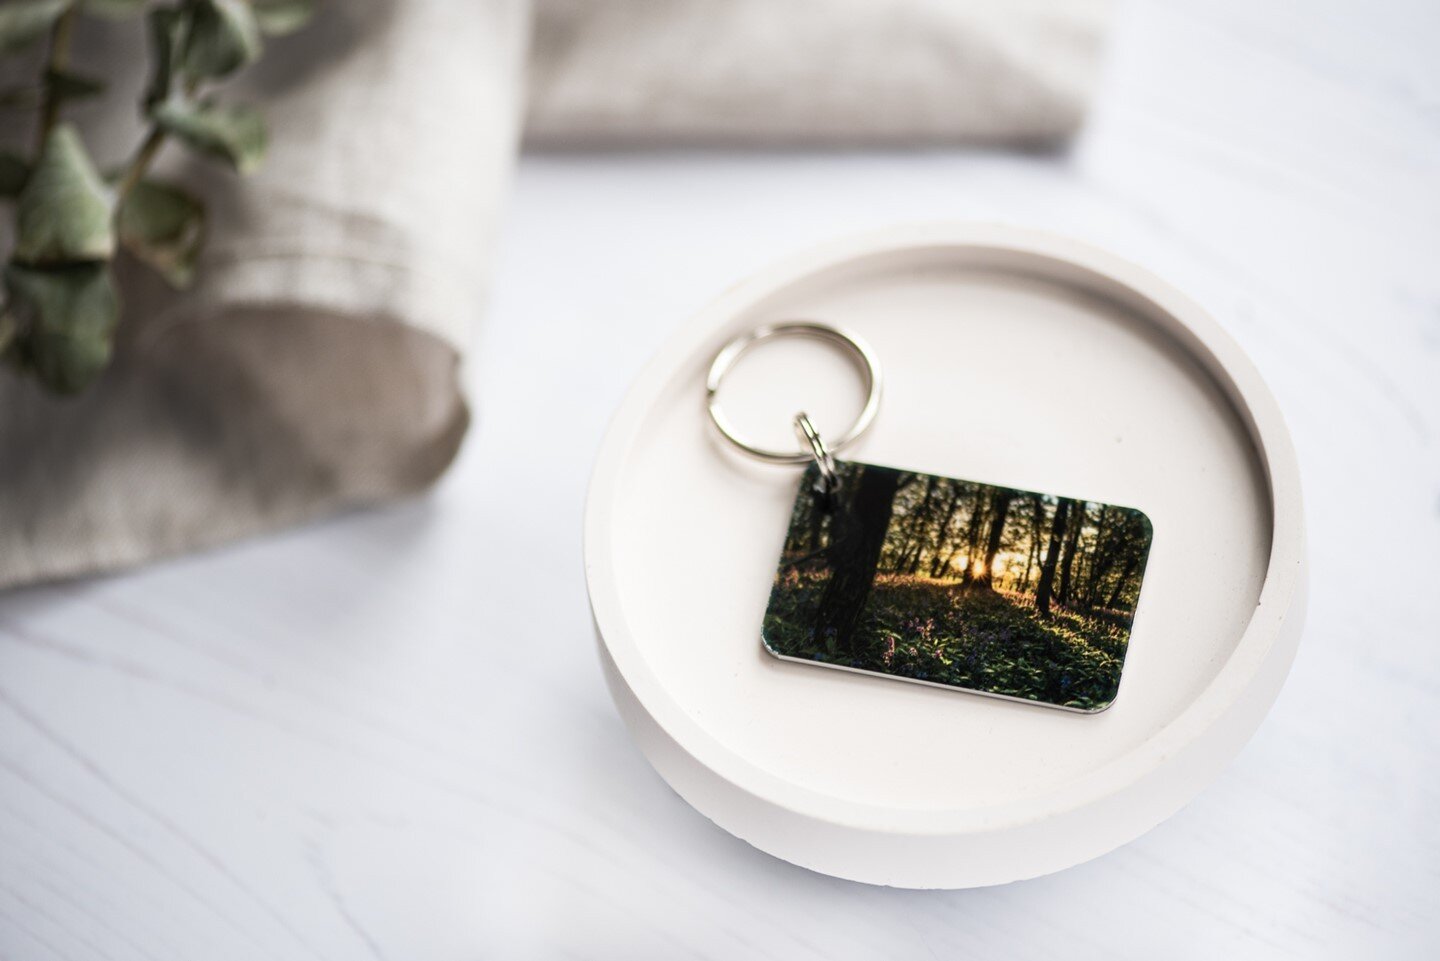 Introducing... keyrings!⁠
⁠
I have been looking into a few different image that work well as keyrings. The best thing is that it's fairly straightforward compared to most of the other products as the shape is more photo-sized. ⁠
⁠
This is sunset over